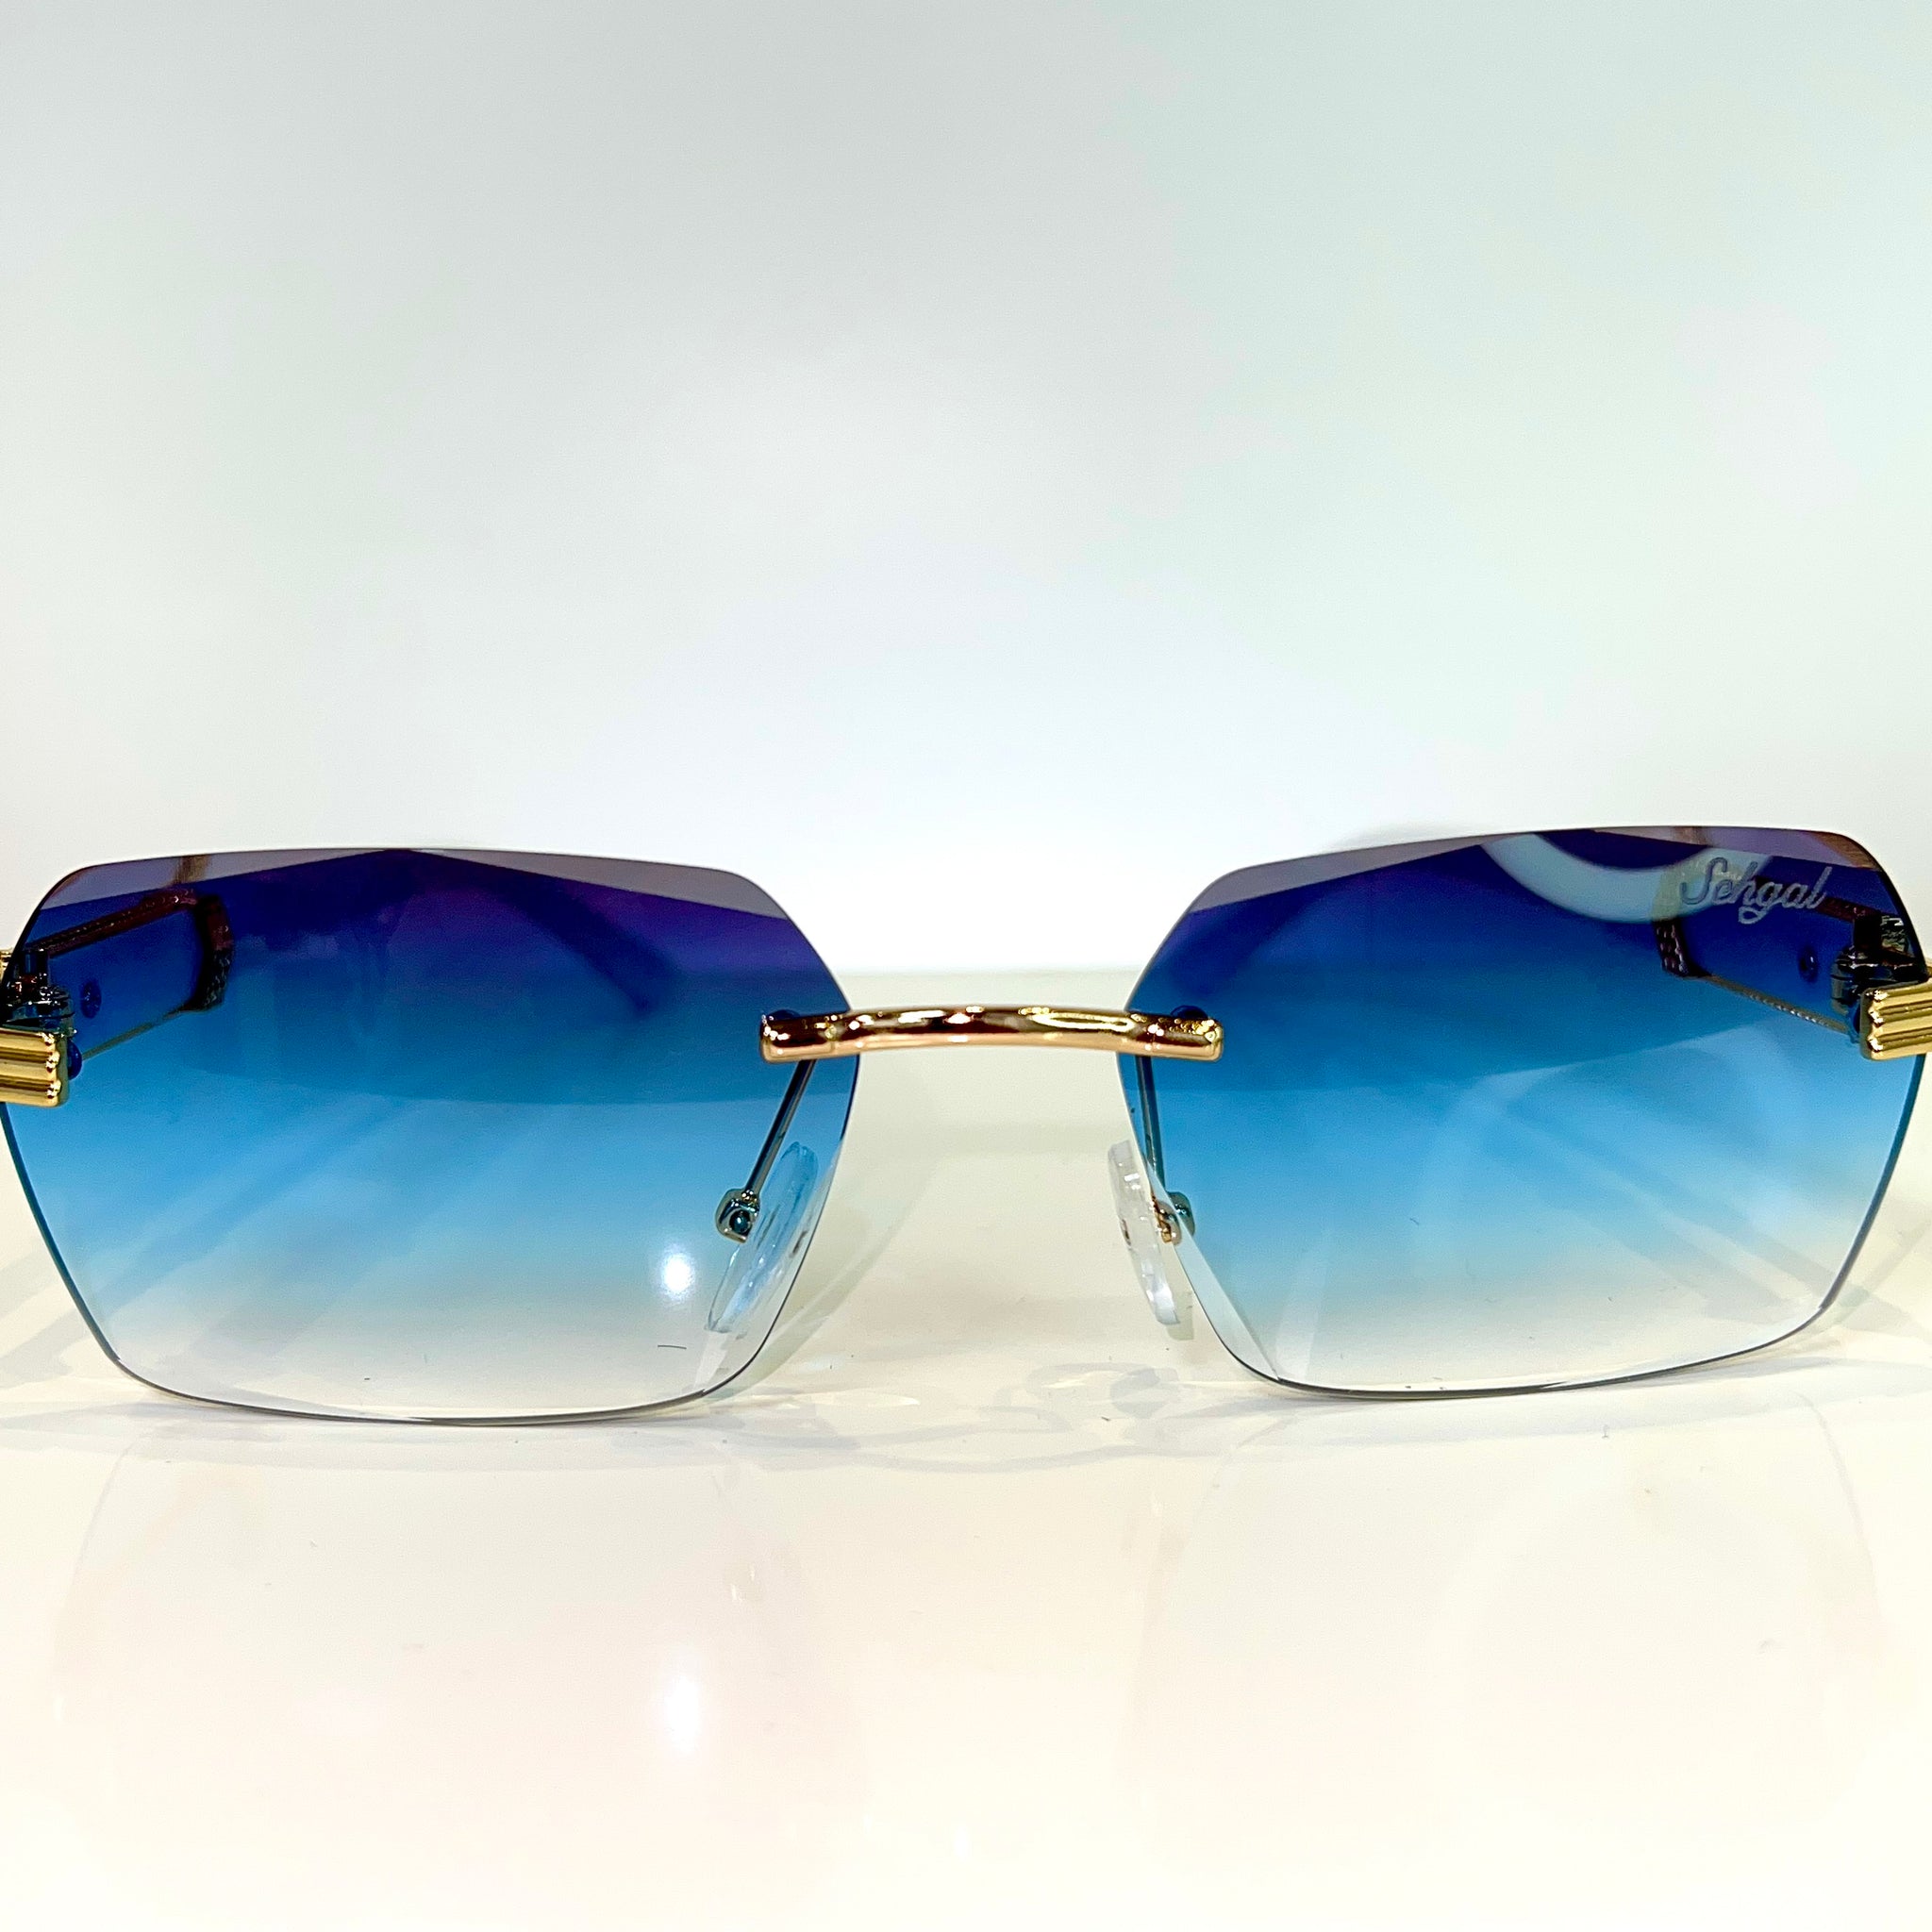 Marblecut Glasses - 14 carat gold plated - Blue Shade